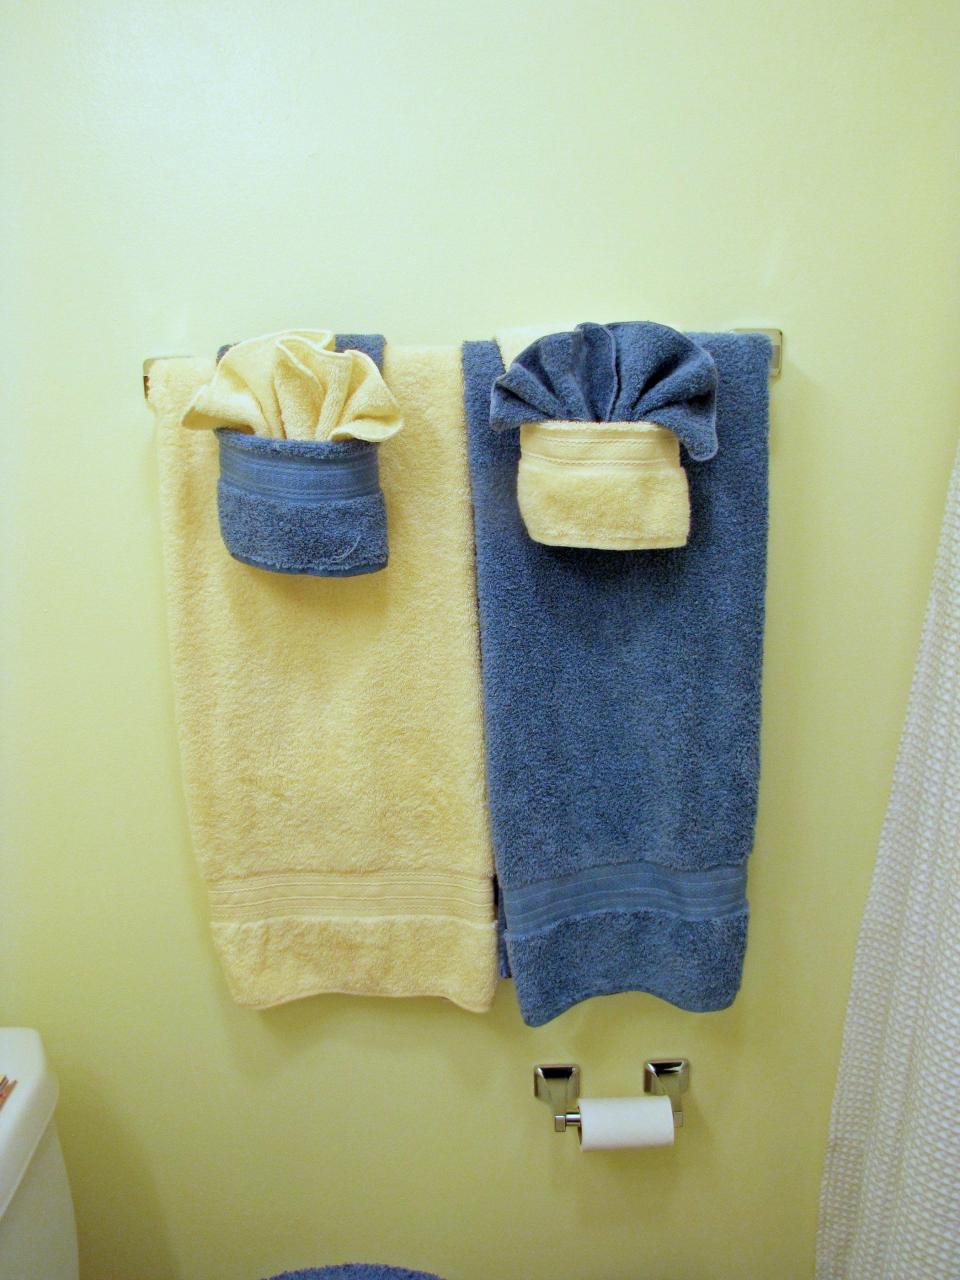 Simple Bath Towel Folding Designs With New Ideas Home decorating Ideas